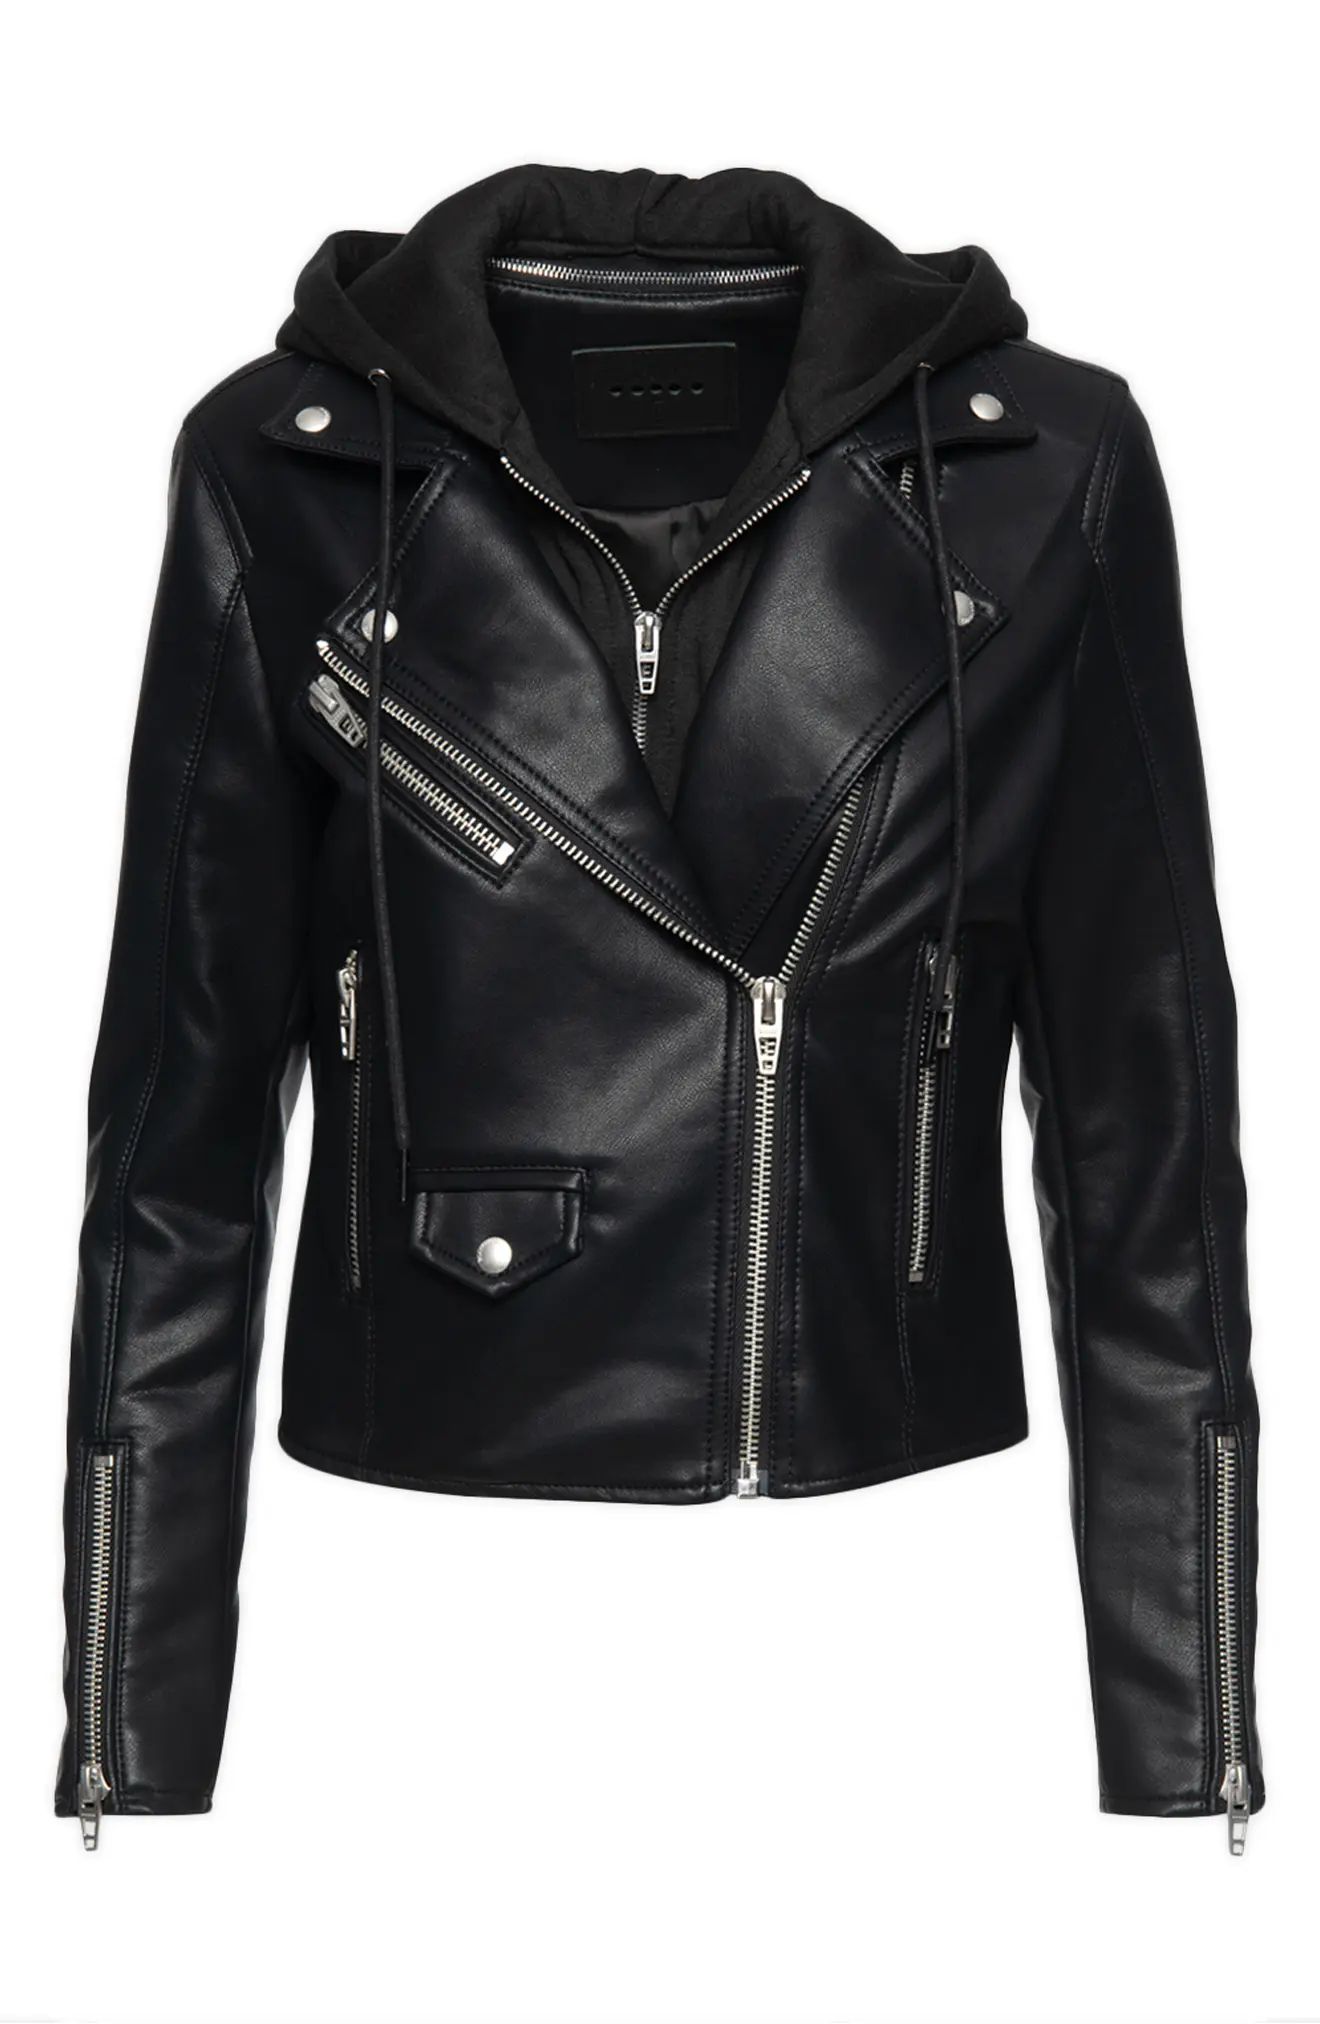 Women's Blanknyc Faux Leather Moto Jacket With Removable Hood, Size Medium - Black | Nordstrom